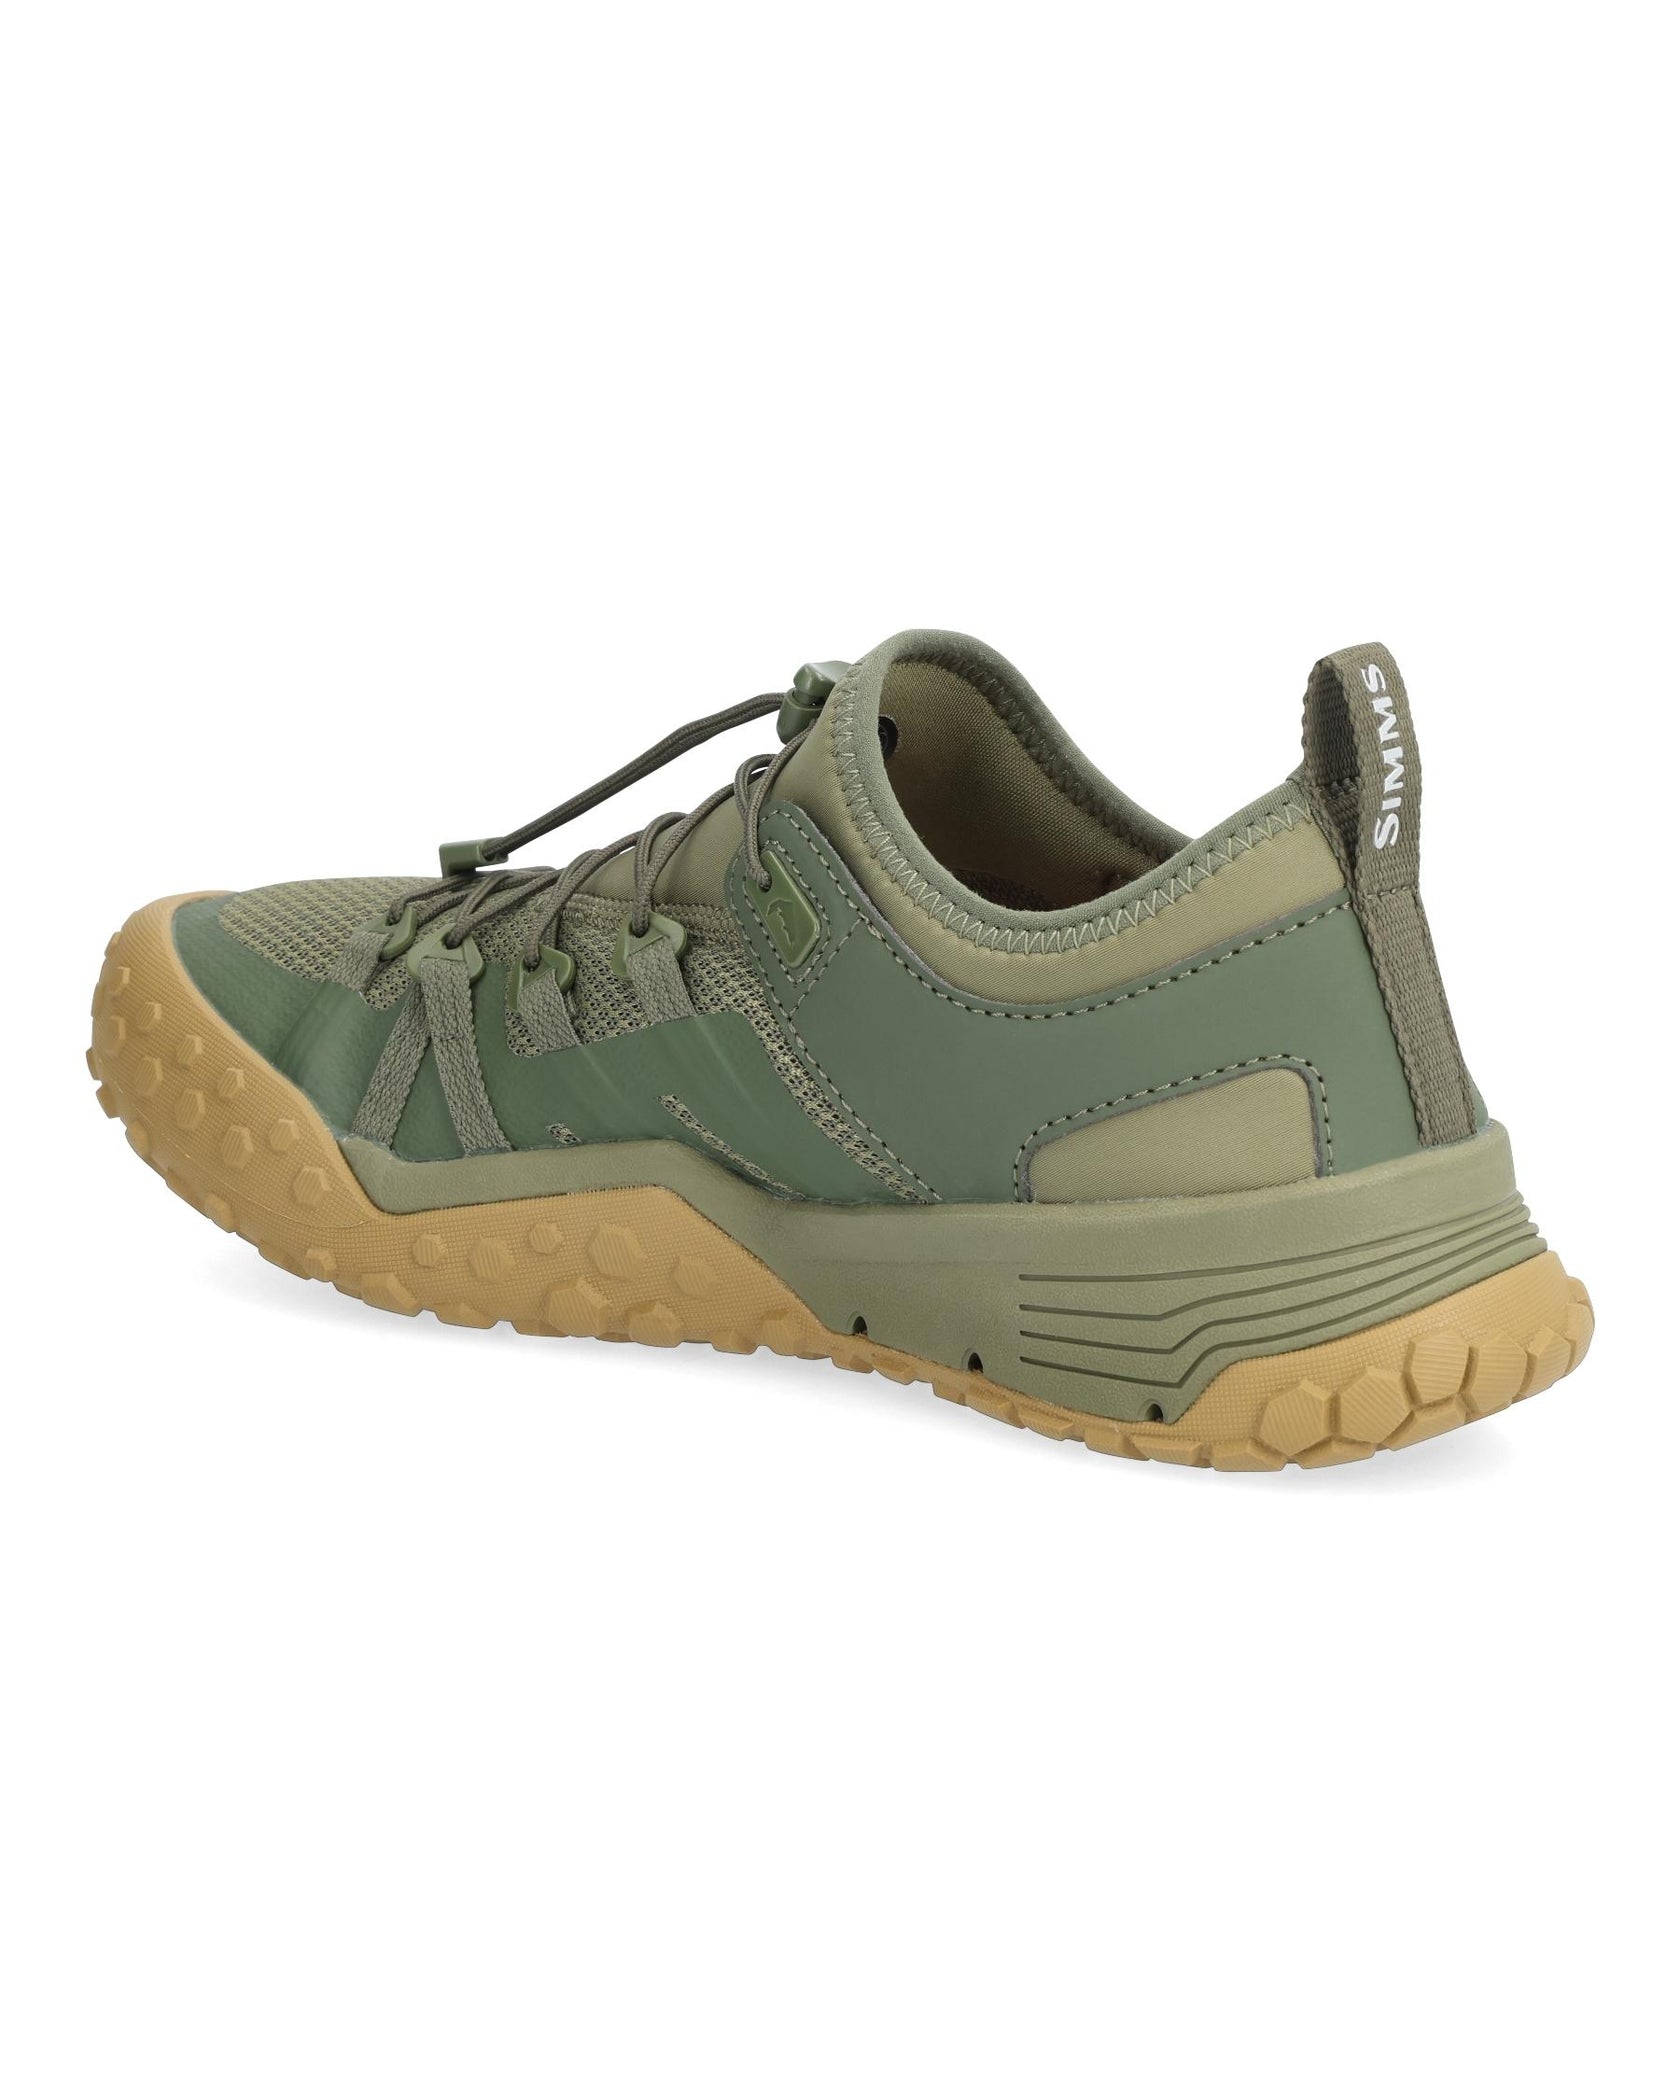 Simms Pursuit Shoe | Simms Fishing Products